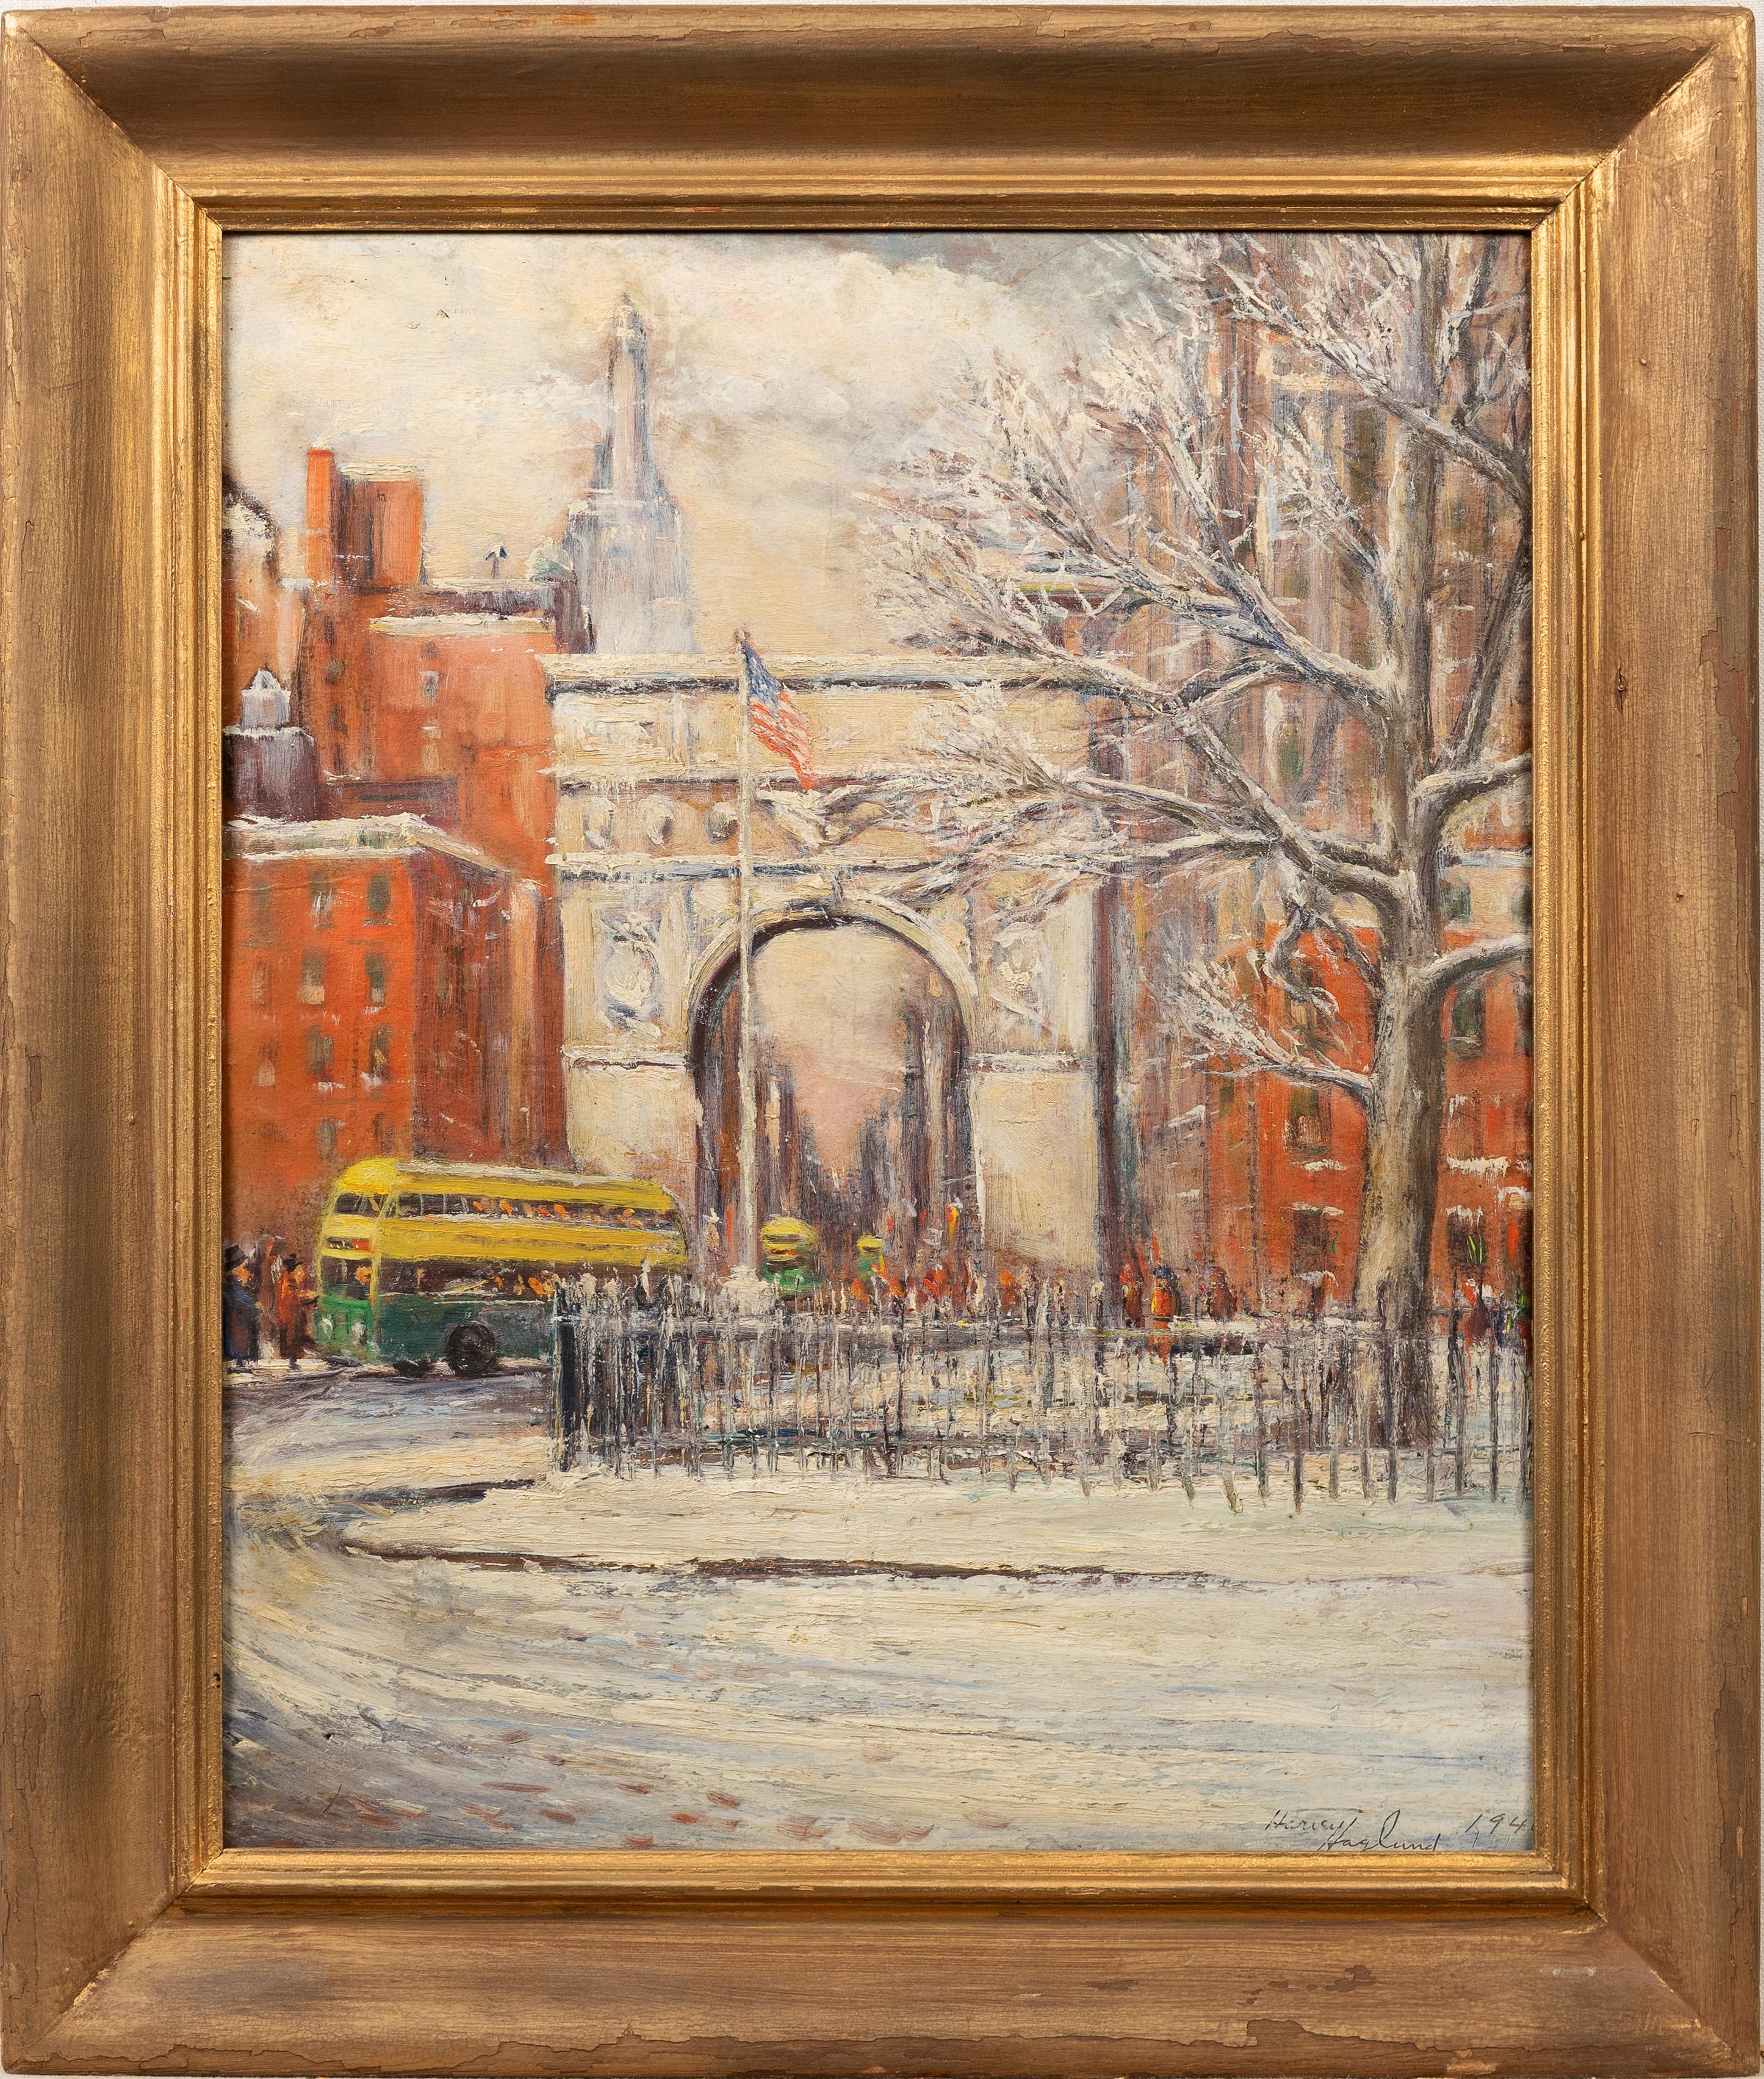 Antique American impressionist New York City scene.  A view of washington square park.  Signed and dated lower right.  Nicely framed.  Oil on canvasboard.  Image size, 16L x 20H.